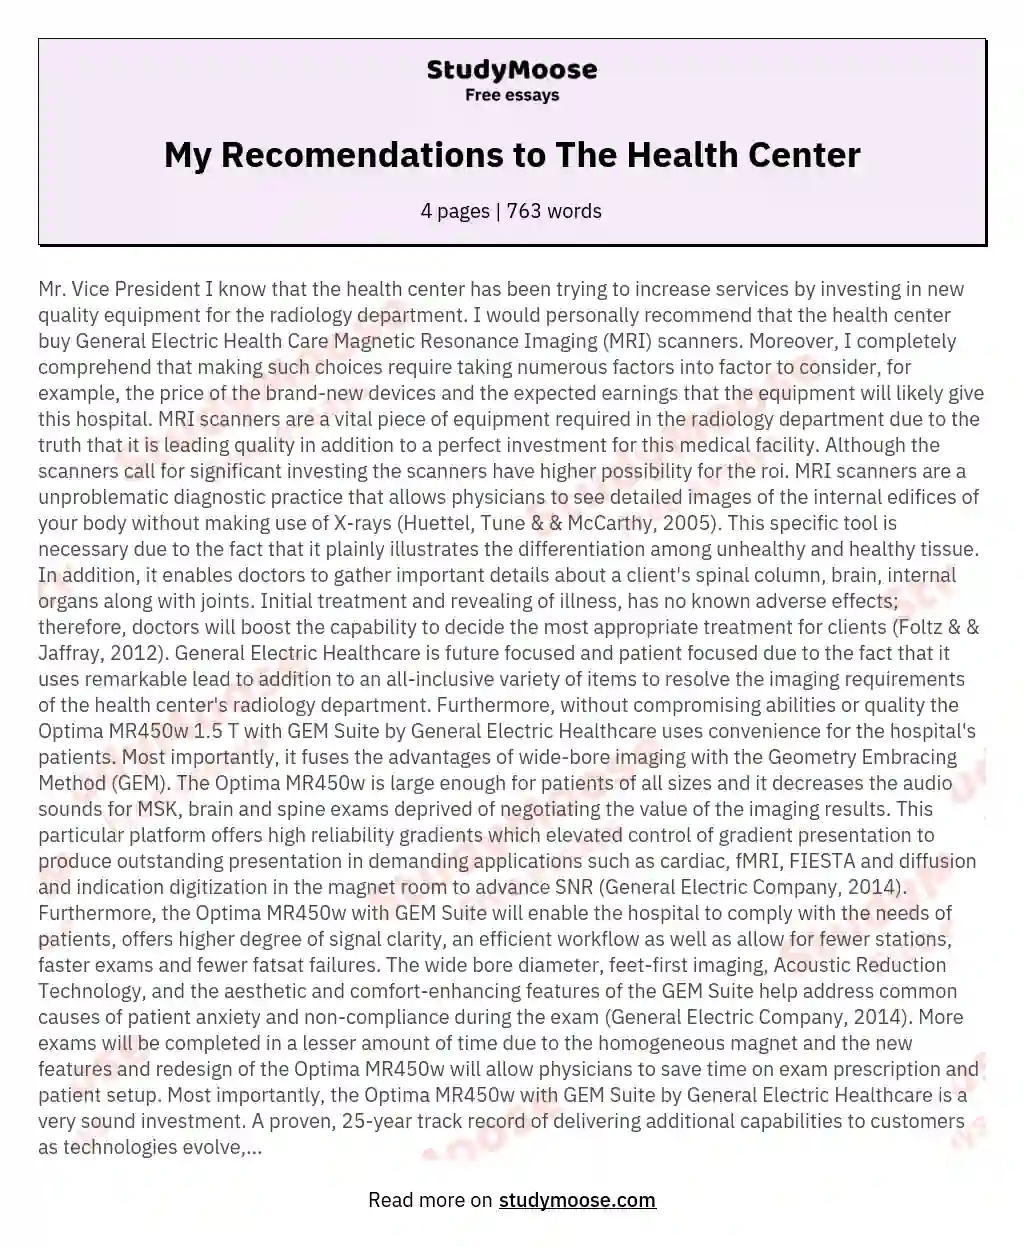 My Recomendations to The Health Center essay